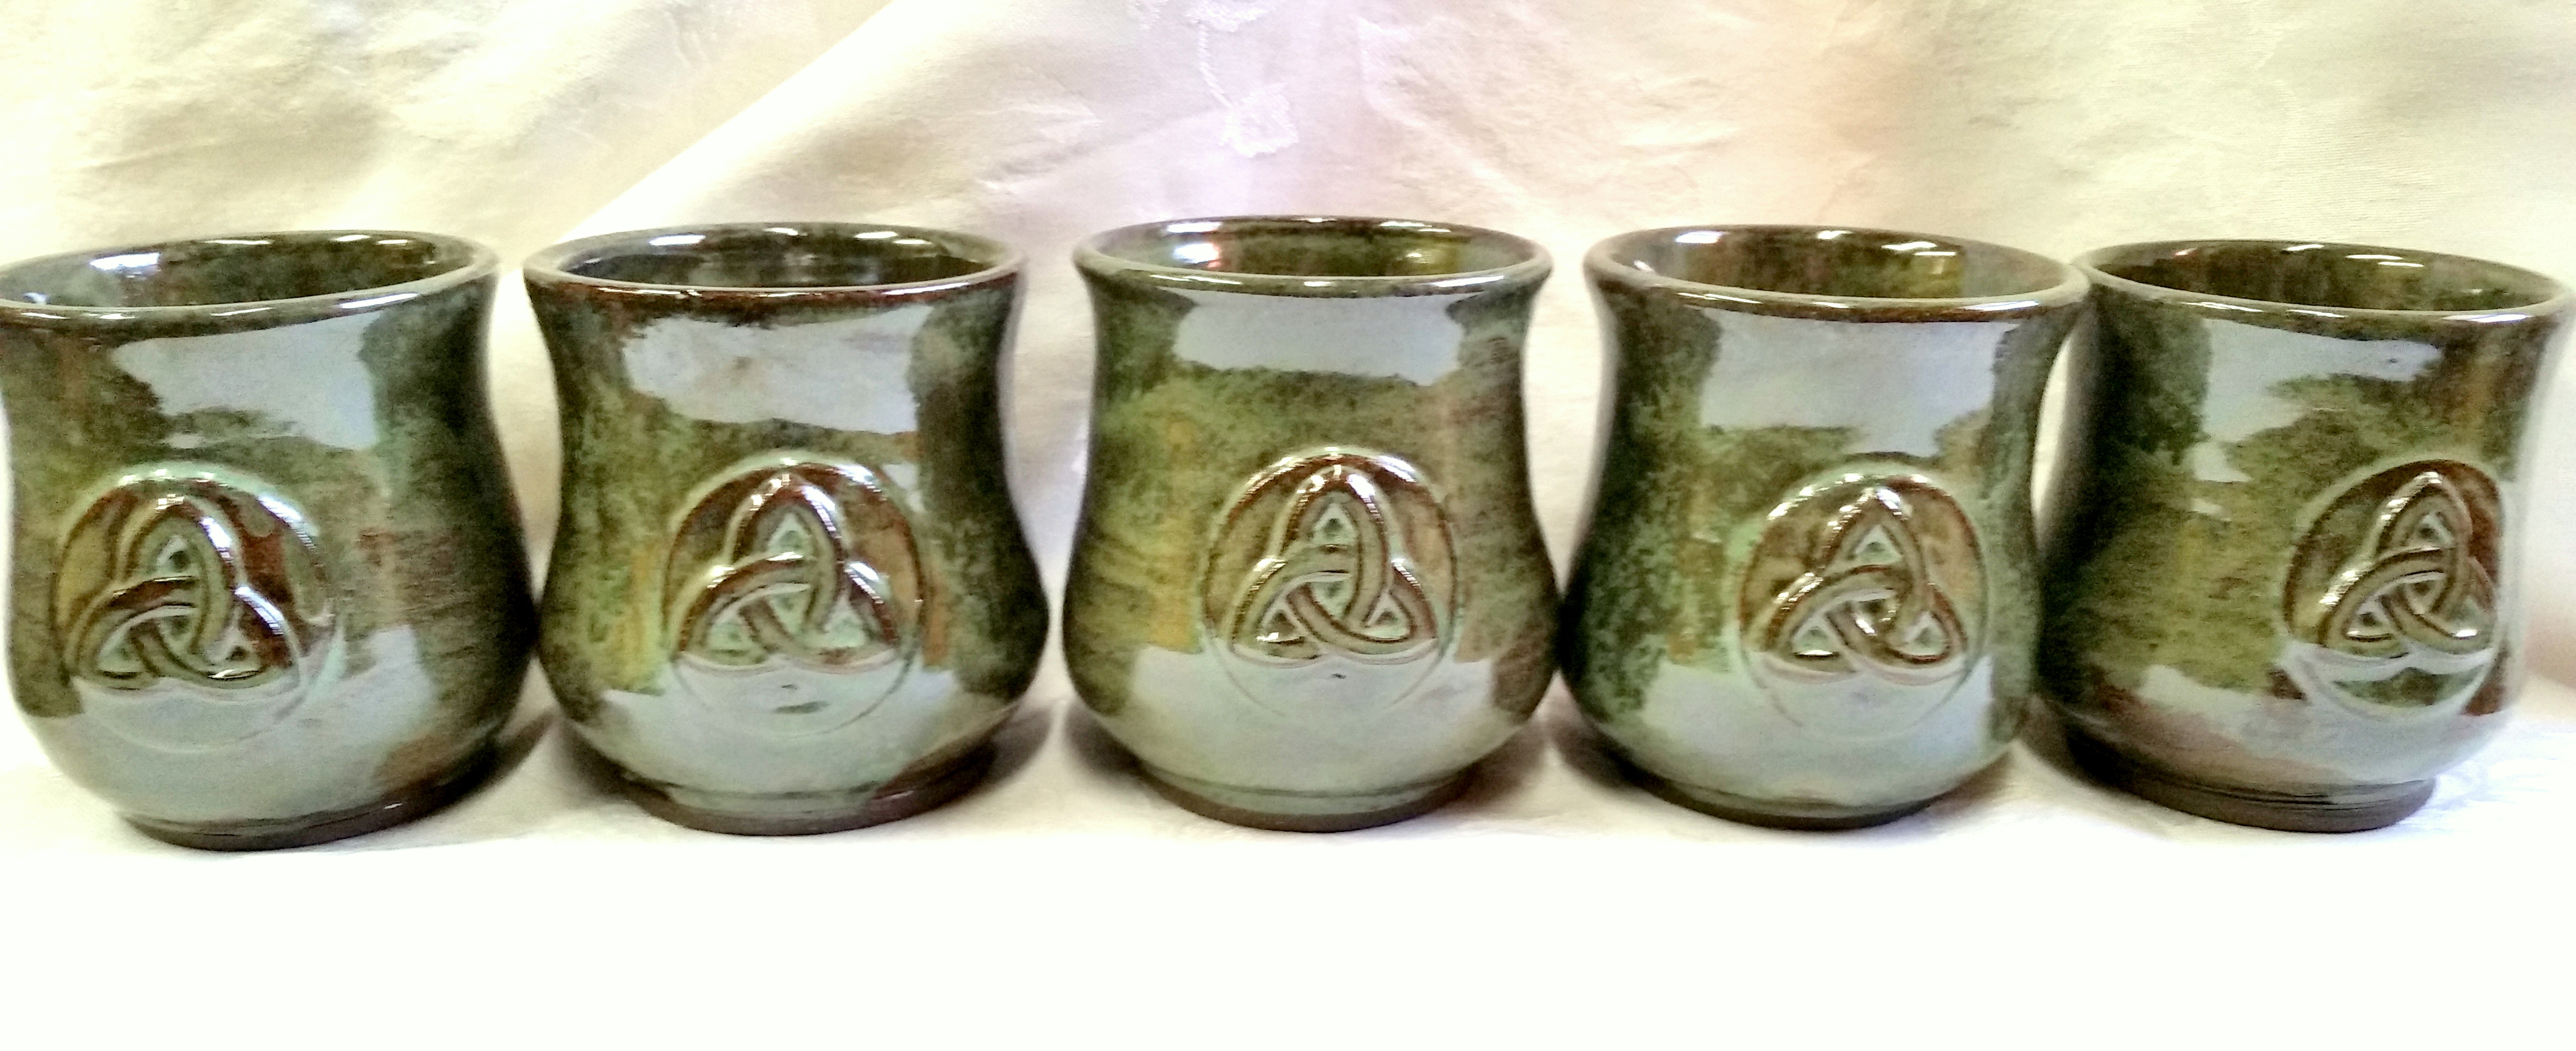 New additions to our Celtic Gifts lineup – just in time for St. Patrick’s Day!